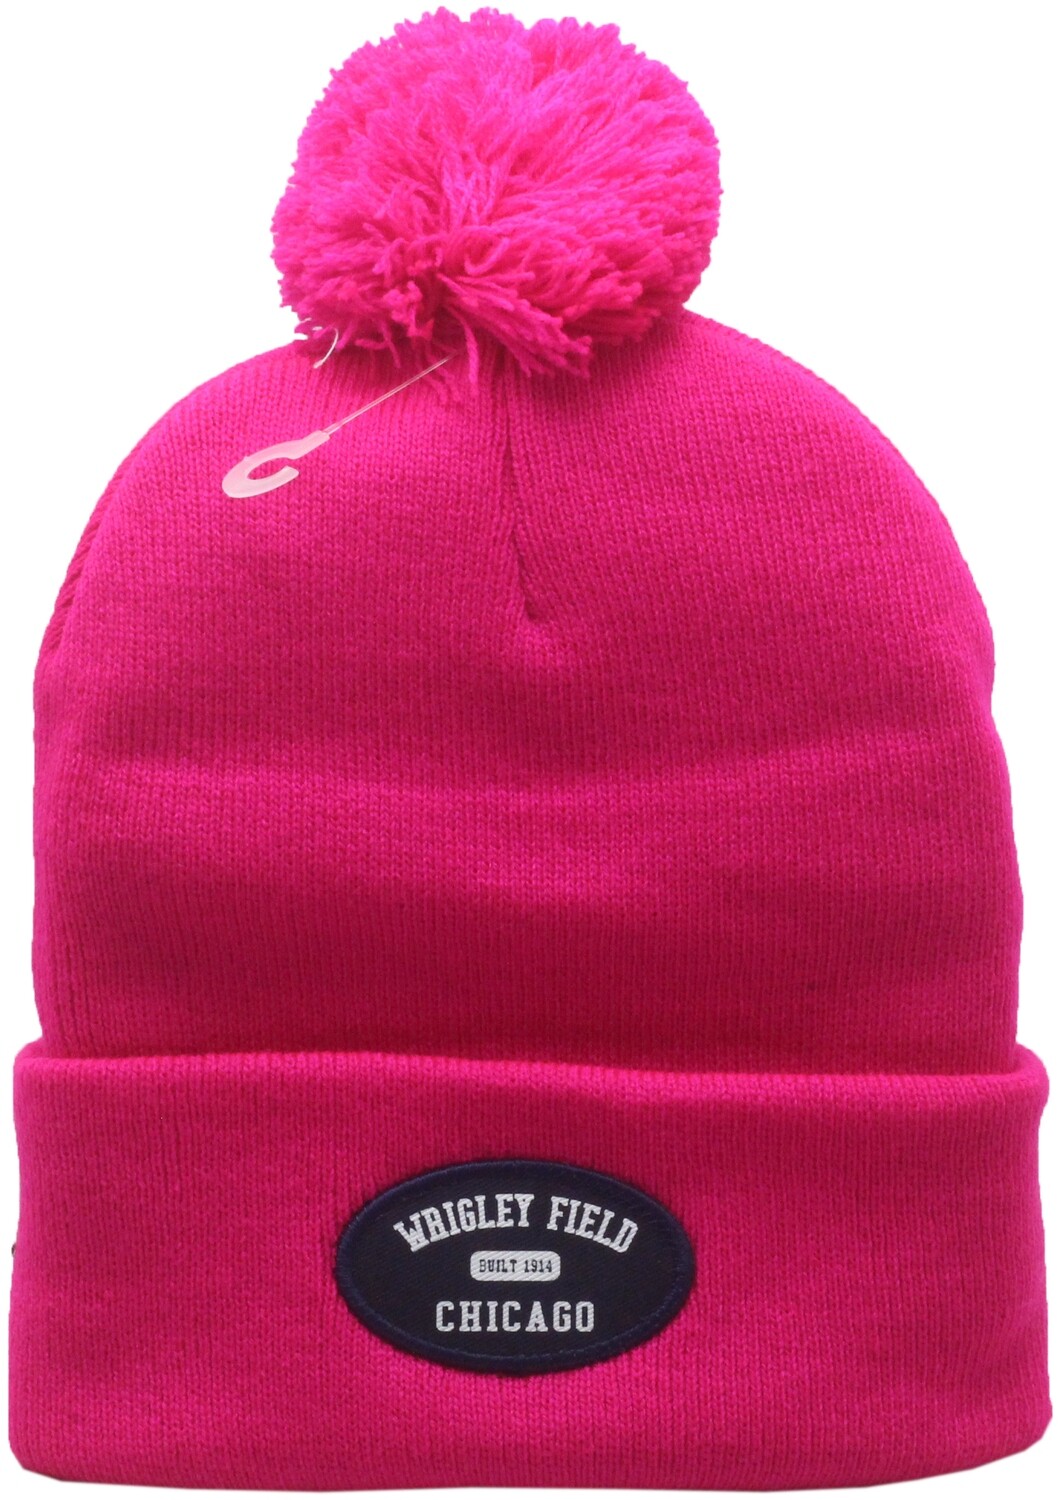 Wrigley Field Chicago Built 1914 Patch Hot Pink Cuffed Knit Hat With Pom